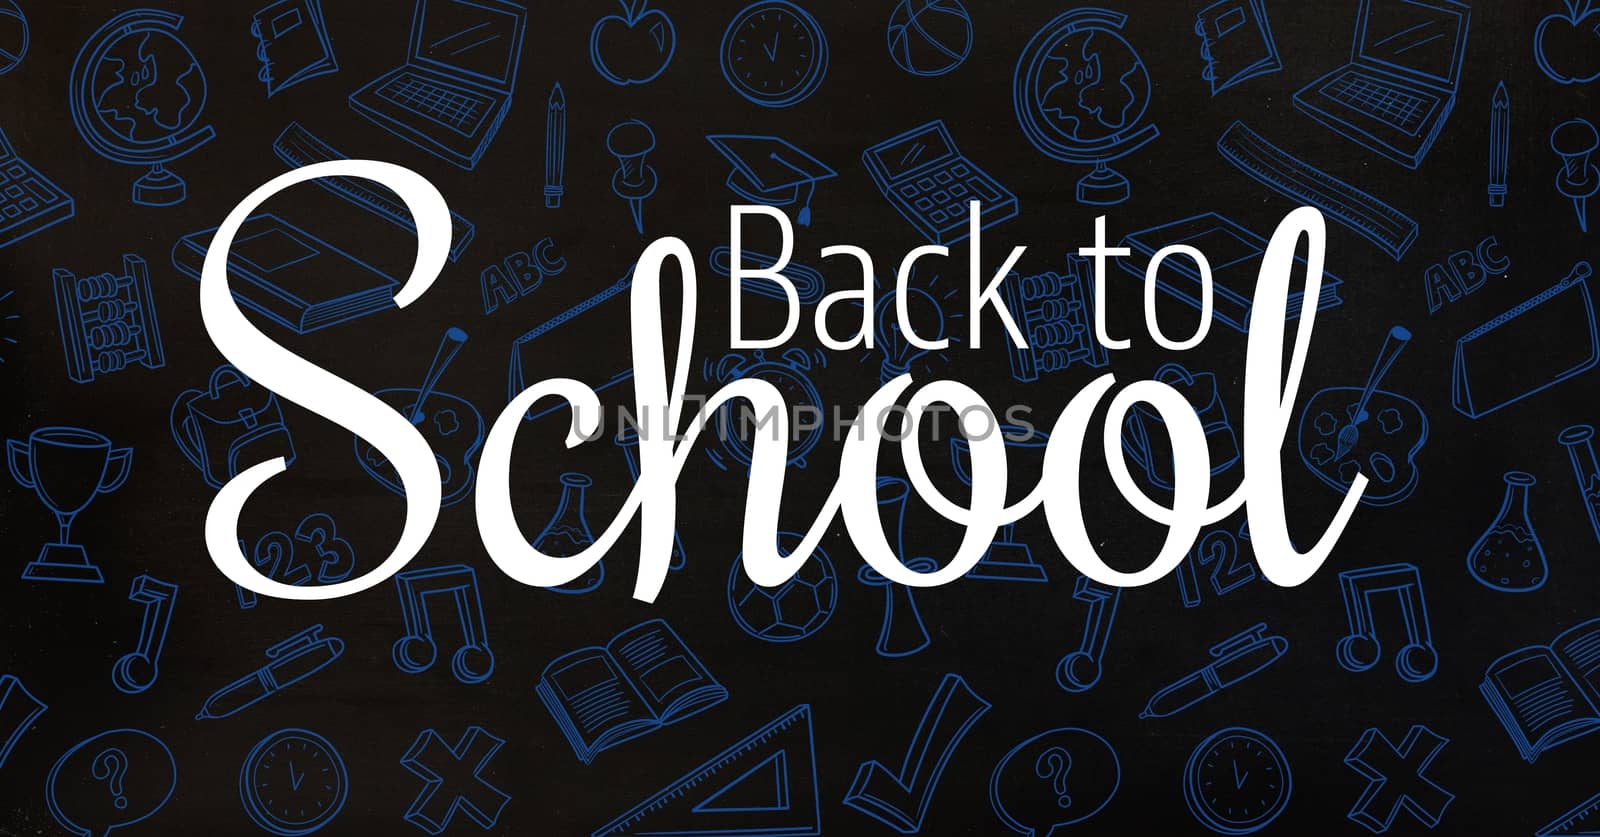 Back to school text with education graphics on blackboard by Wavebreakmedia